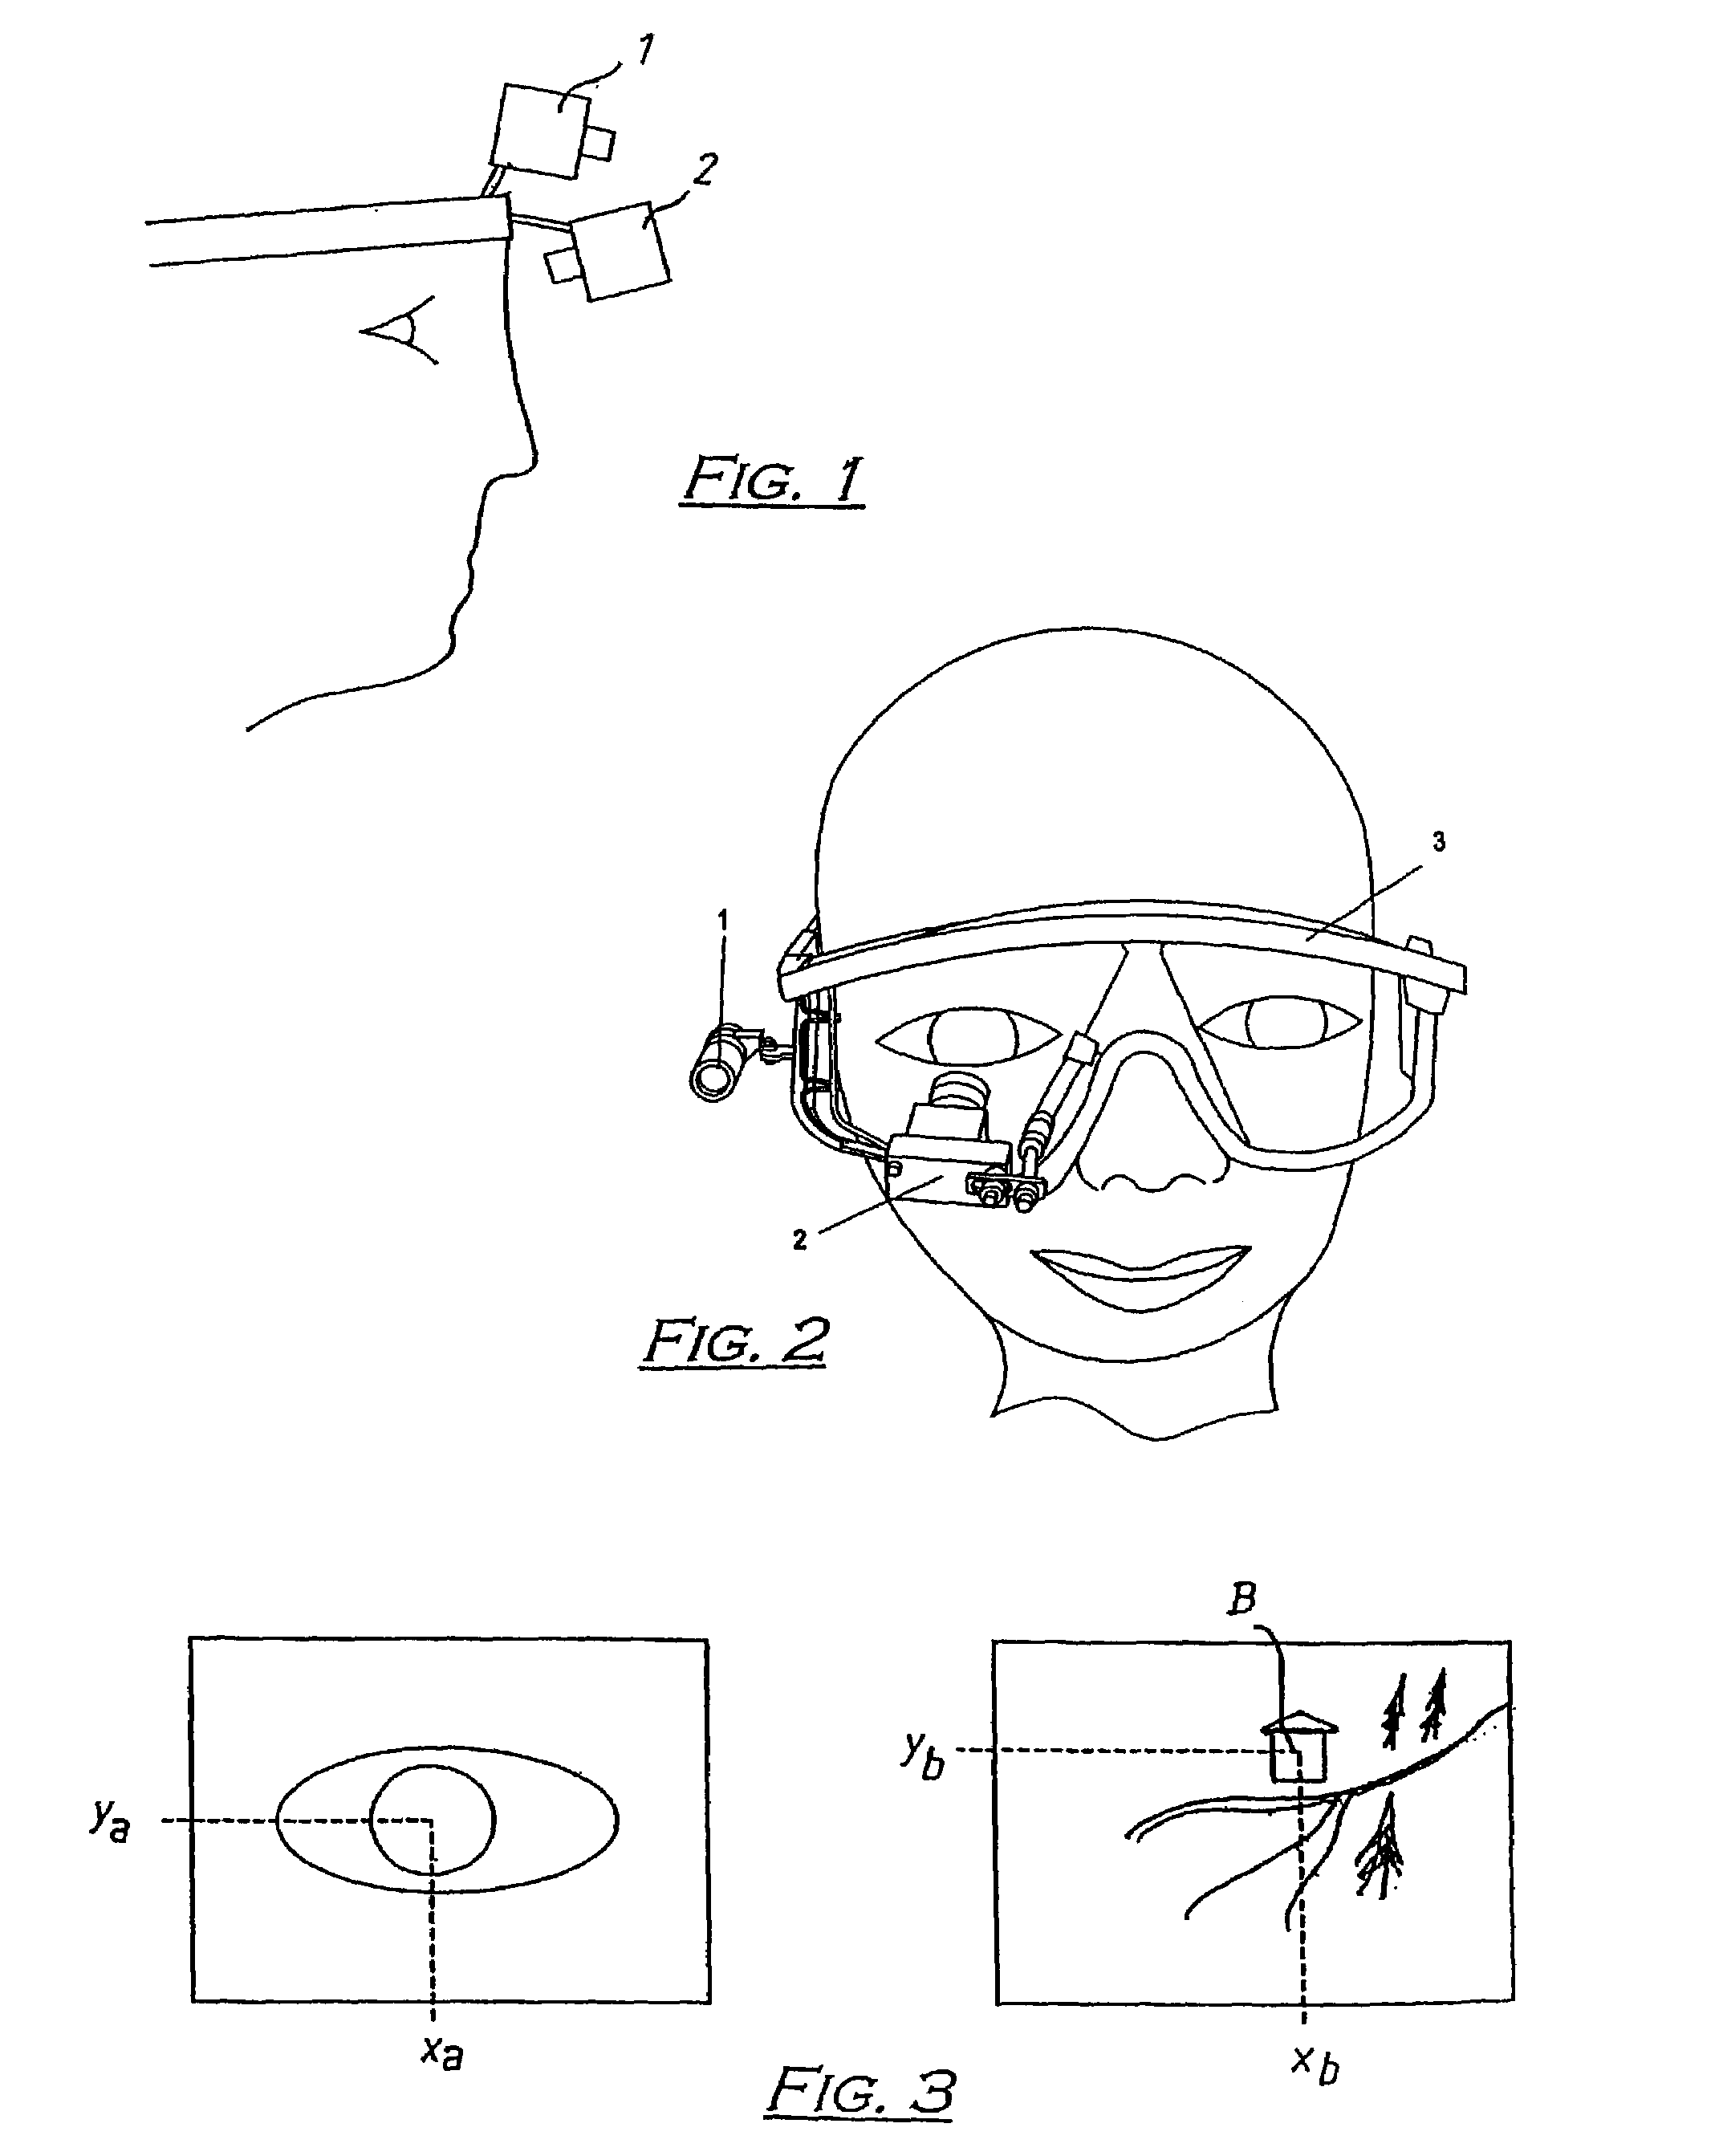 Method for detecting, evaluating, and analyzing look sequences